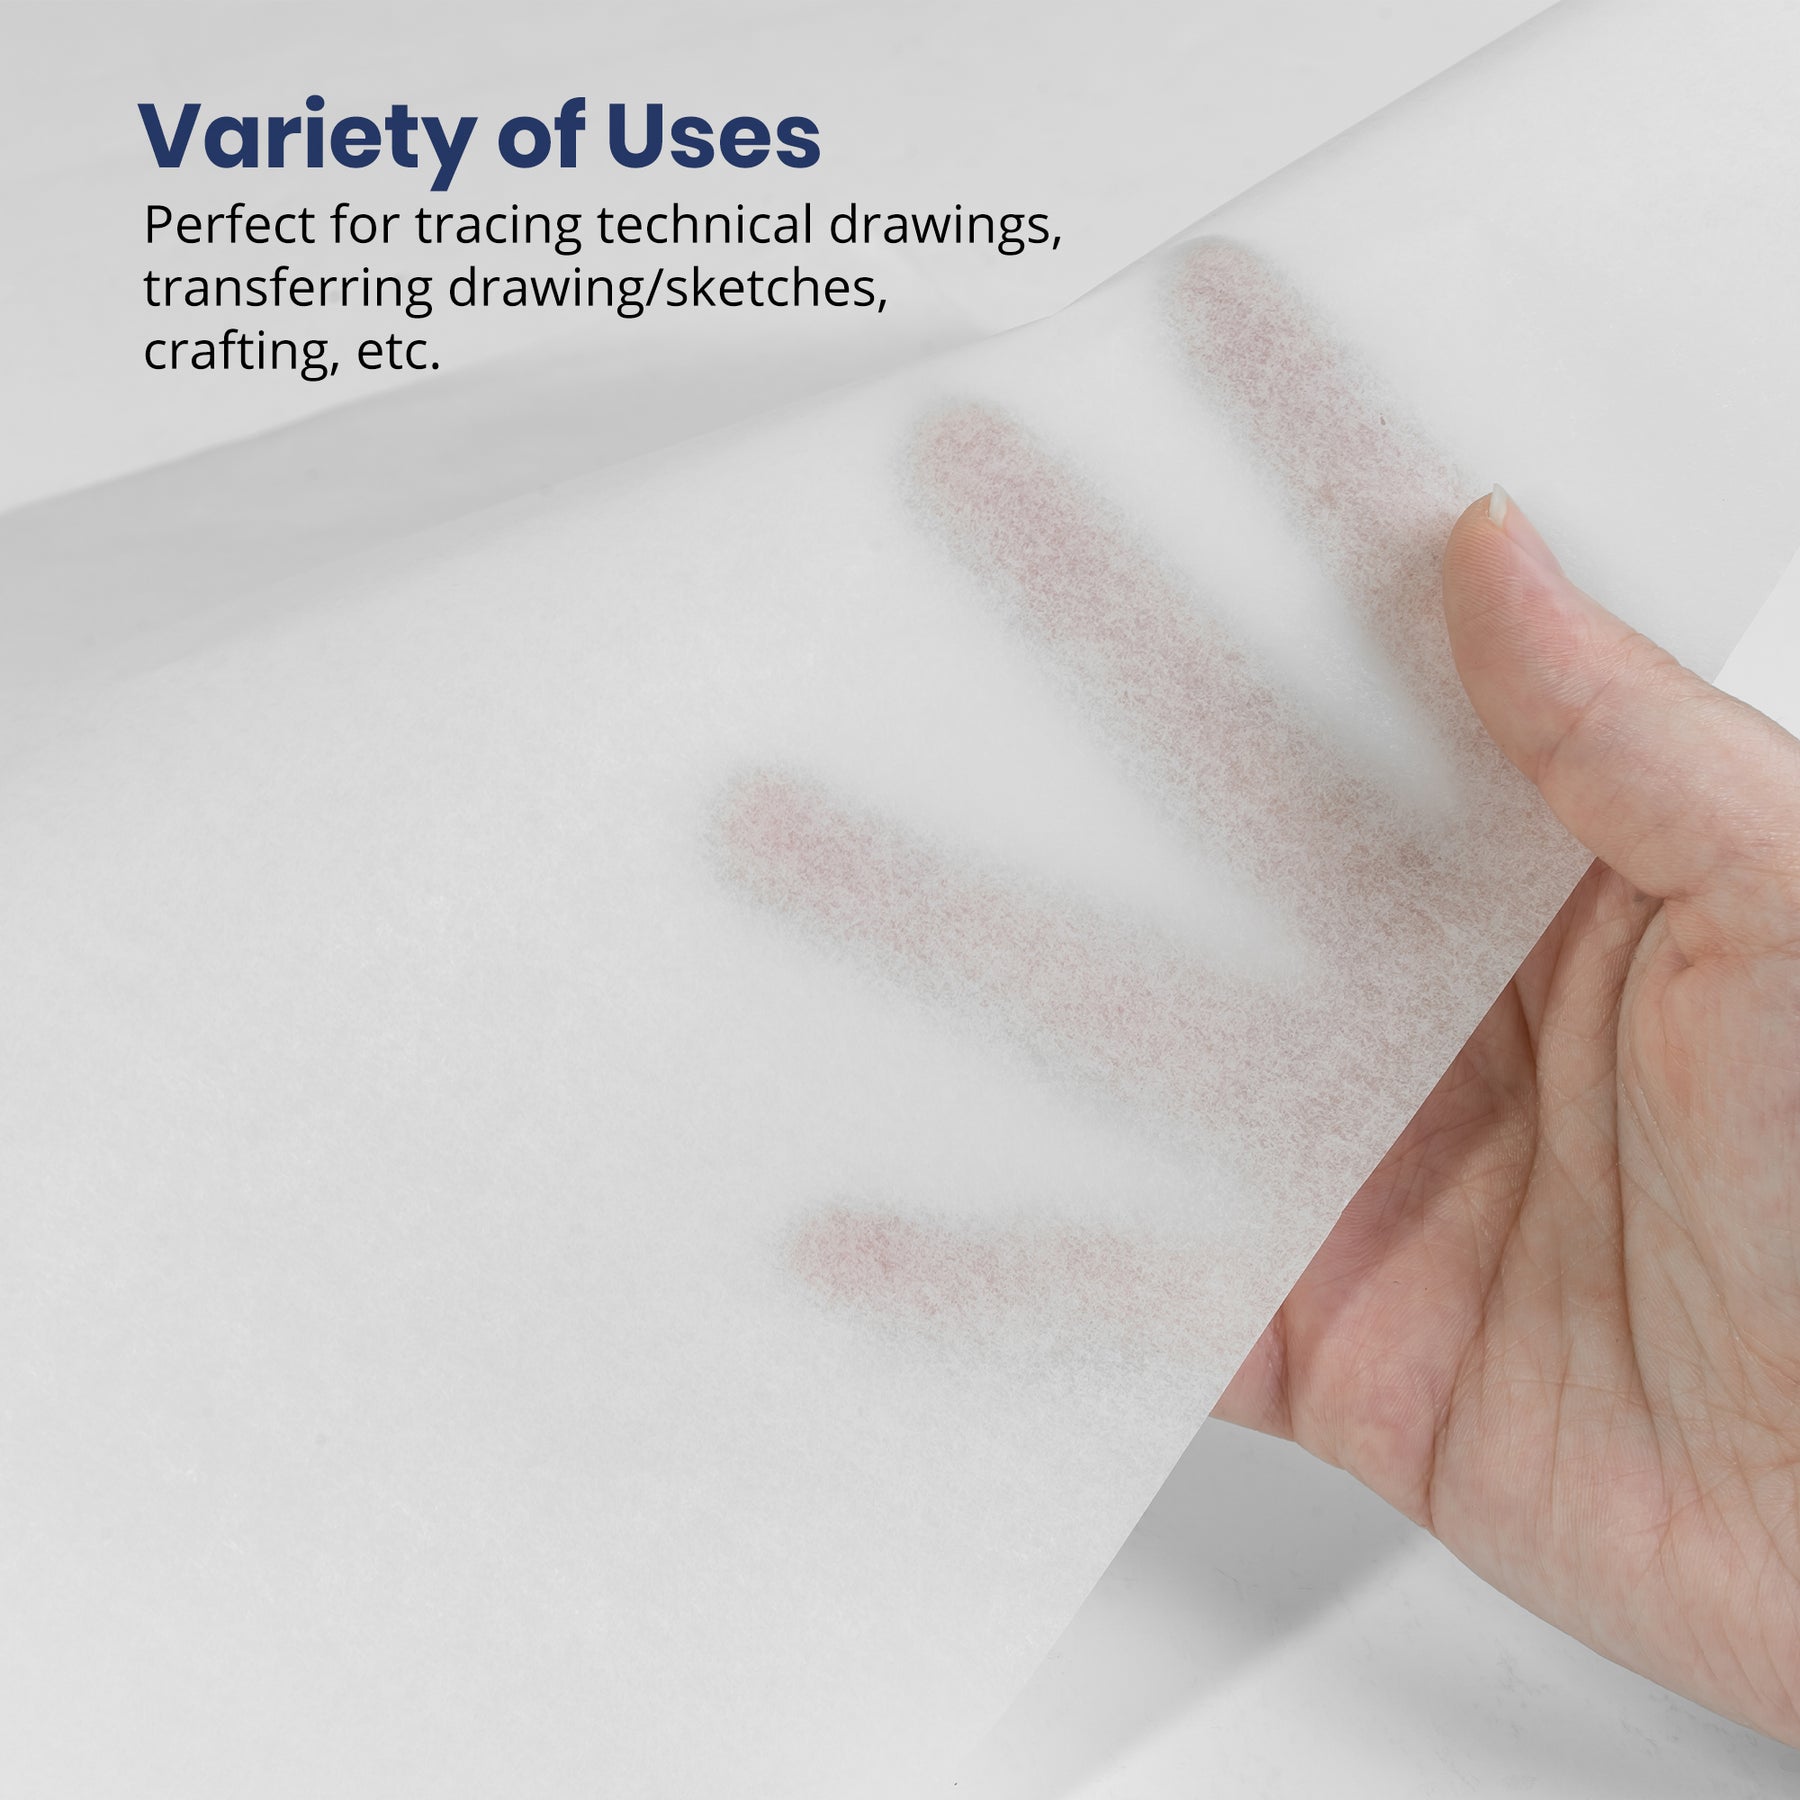 20x Translucent Tracing Vellum Drafting Paper Sheets with Engineer